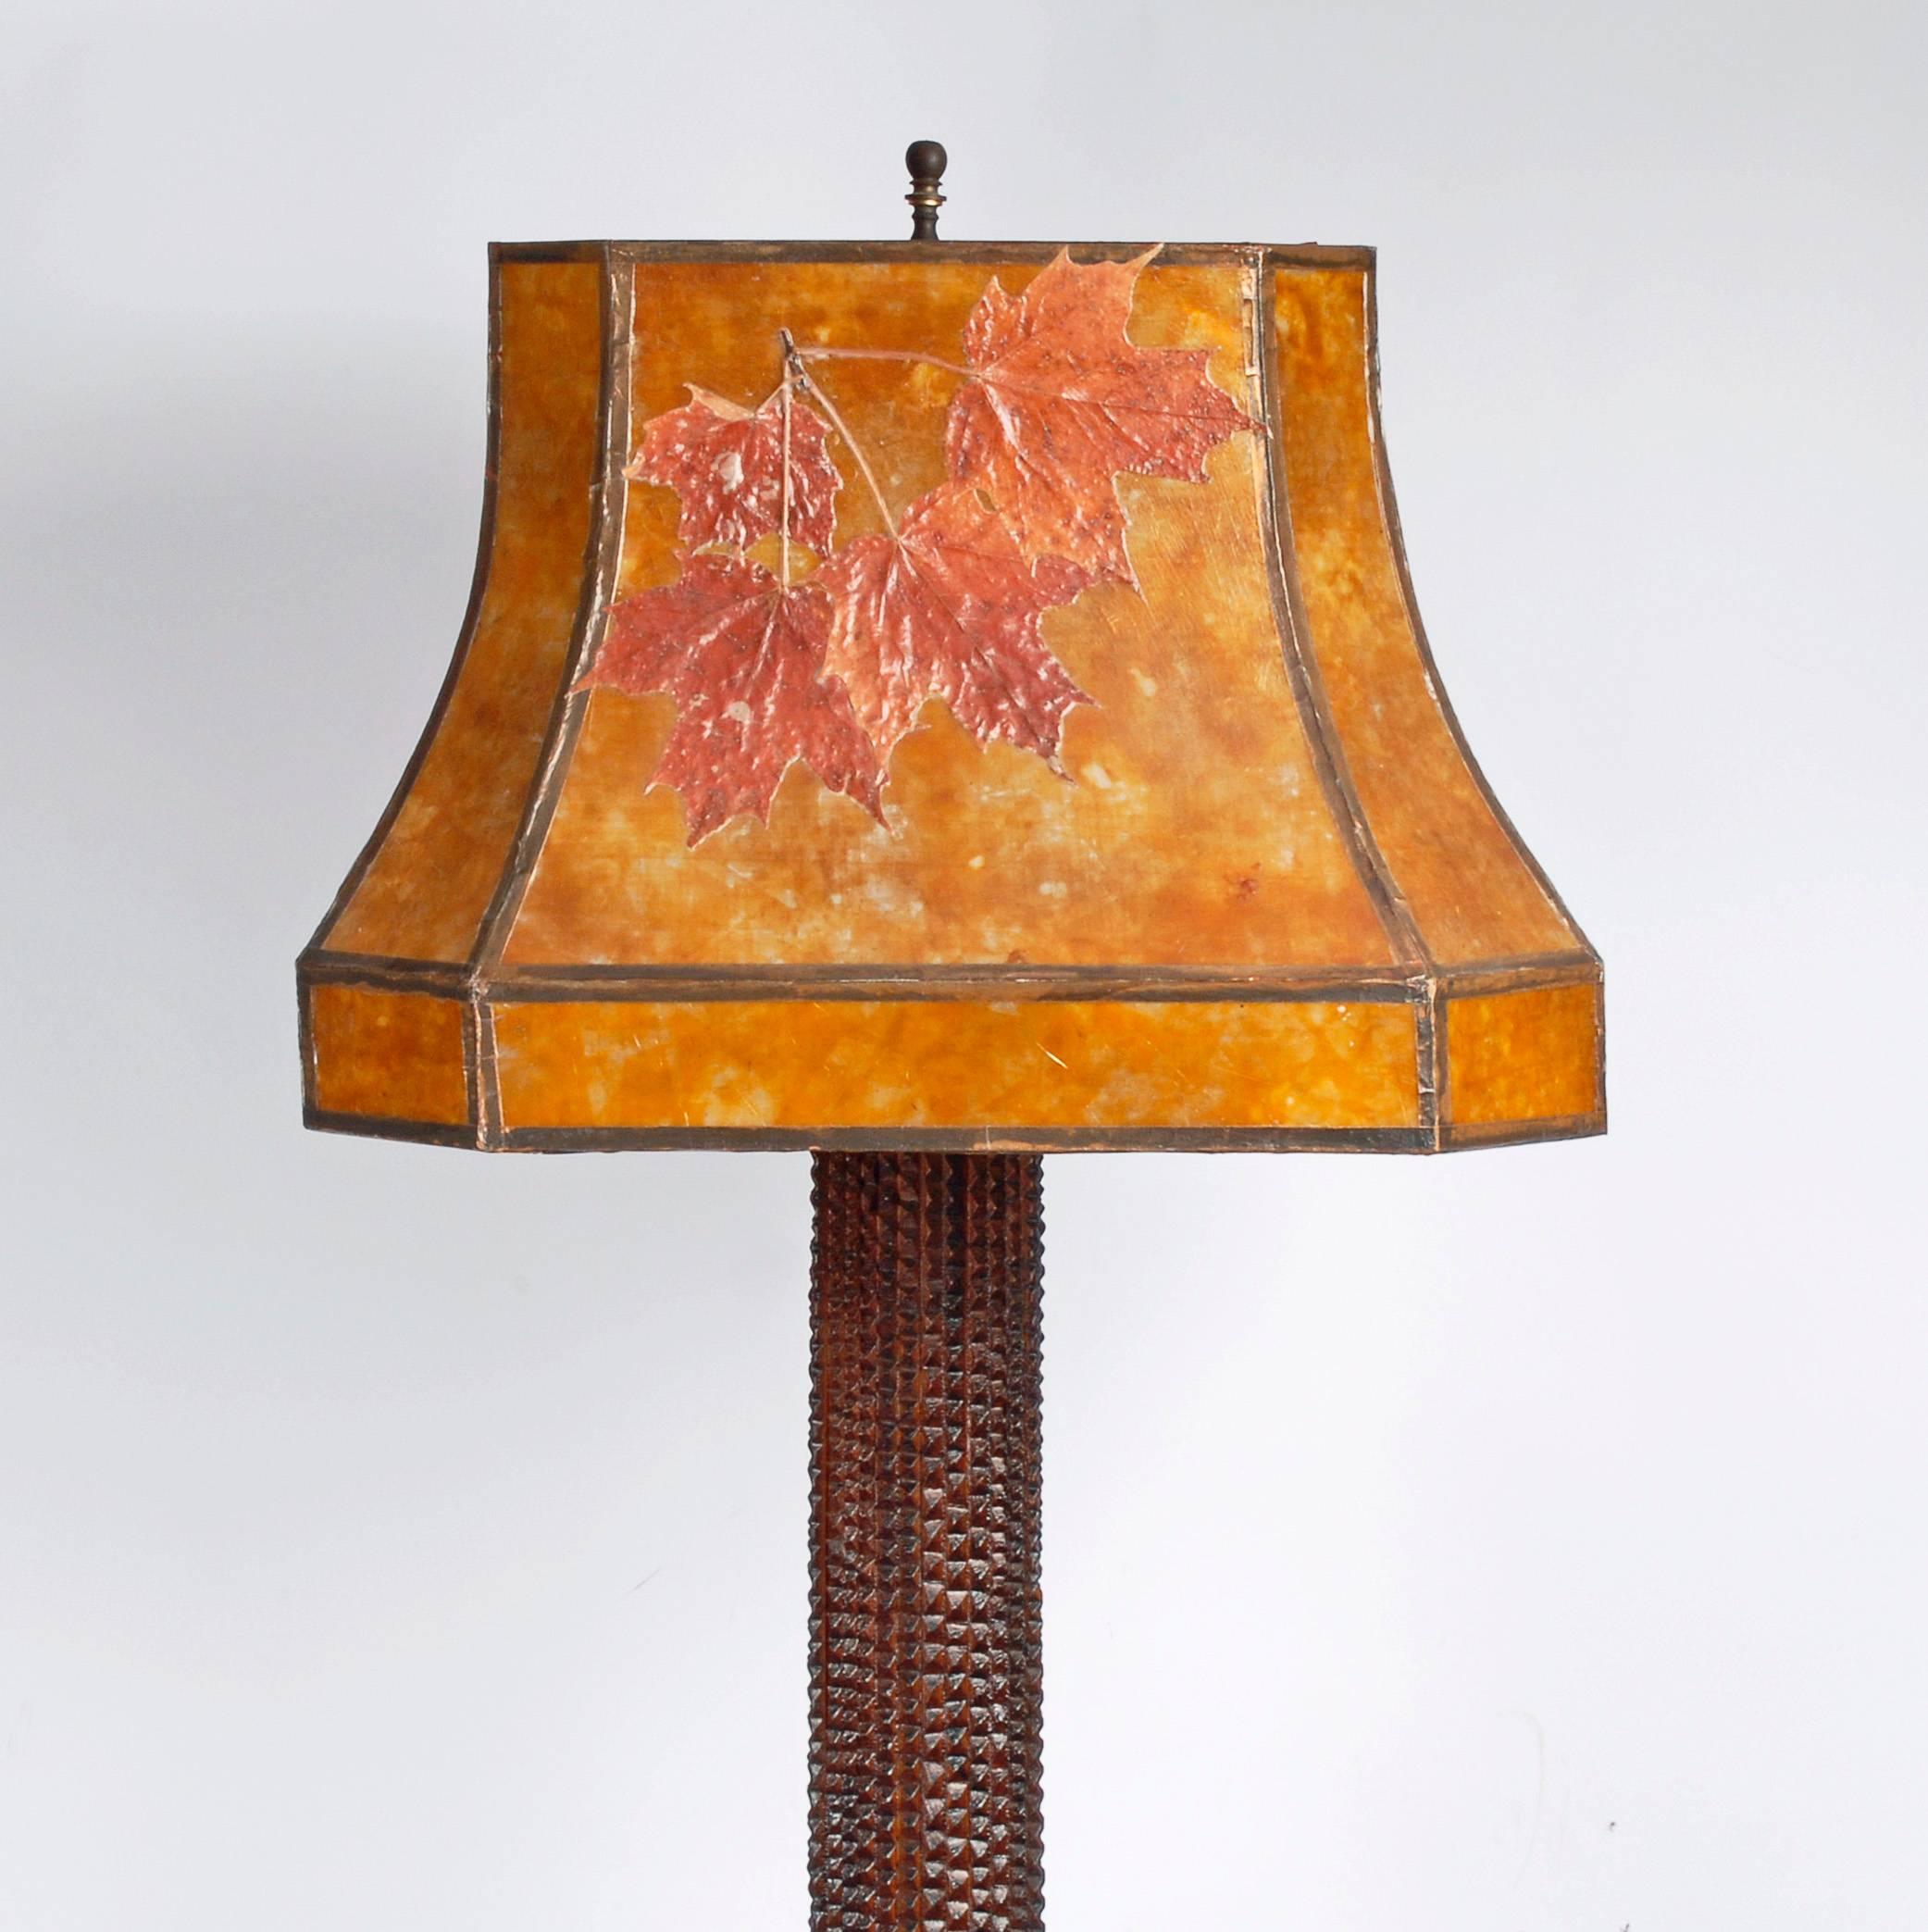 A large elegant Tramp Art floor lamp with a long slender column and a fancy deeply layered footed base that was illustrated in our first book, Tramp Art One Notch at a time on page 154. The floor lamp is among the rarest of forms found in Tramp Art.